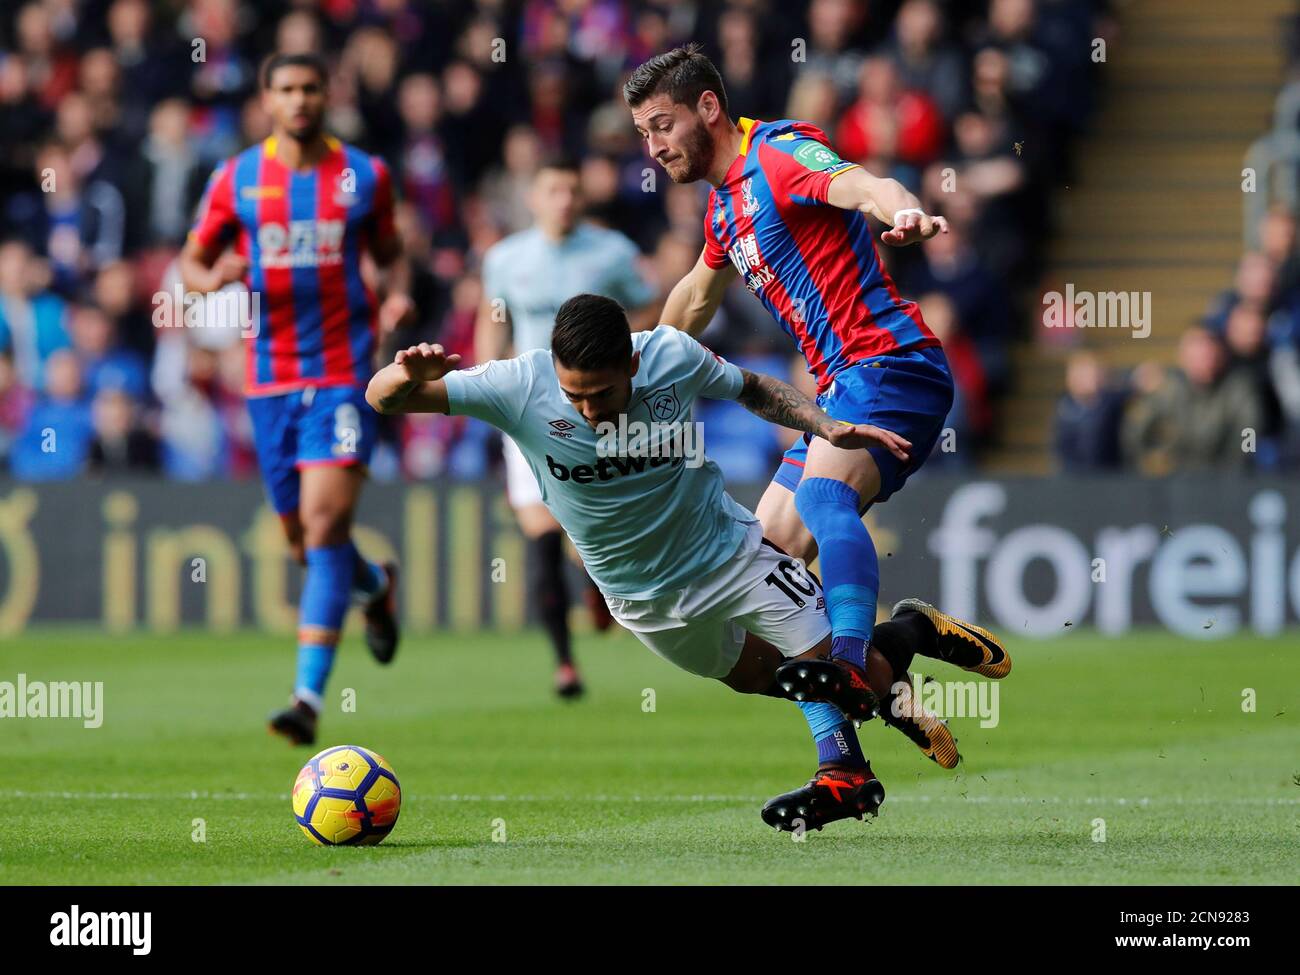 Soccer Football - Premier League - Crystal Palace vs West Ham United - Selhurst Park, London, Britain - October 28, 2017   West Ham United's Javier Hernandez in action with Crystal Palace's Joel Ward    REUTERS/Eddie Keogh    EDITORIAL USE ONLY. No use with unauthorized audio, video, data, fixture lists, club/league logos or 'live' services. Online in-match use limited to 75 images, no video emulation. No use in betting, games or single club/league/player publications. Please contact your account representative for further details.? Stock Photo